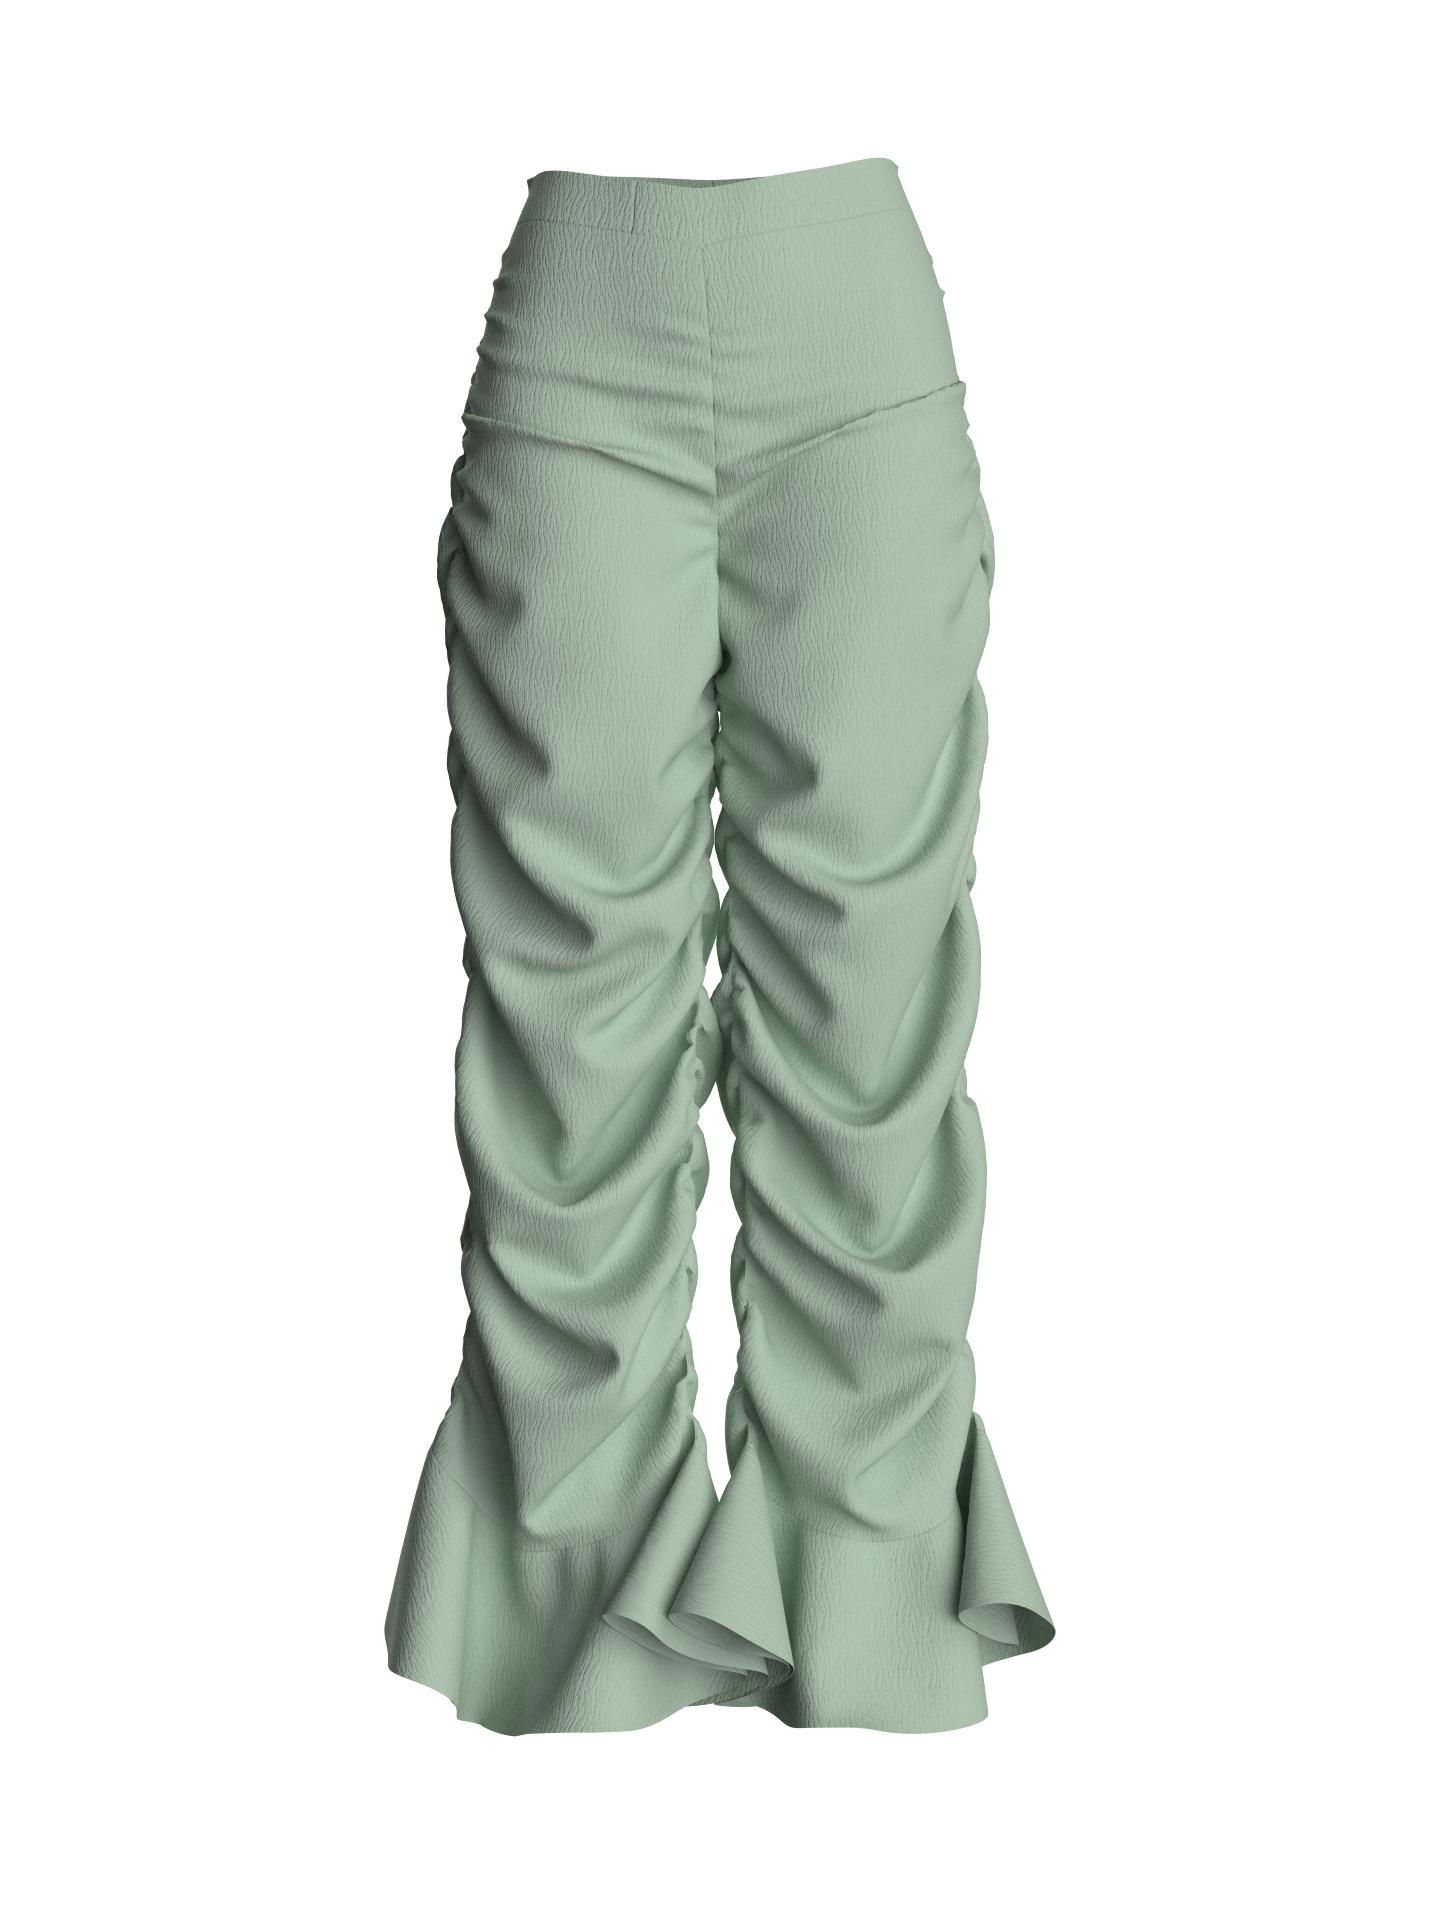 Green Gathered Trousers by SRITAOZ